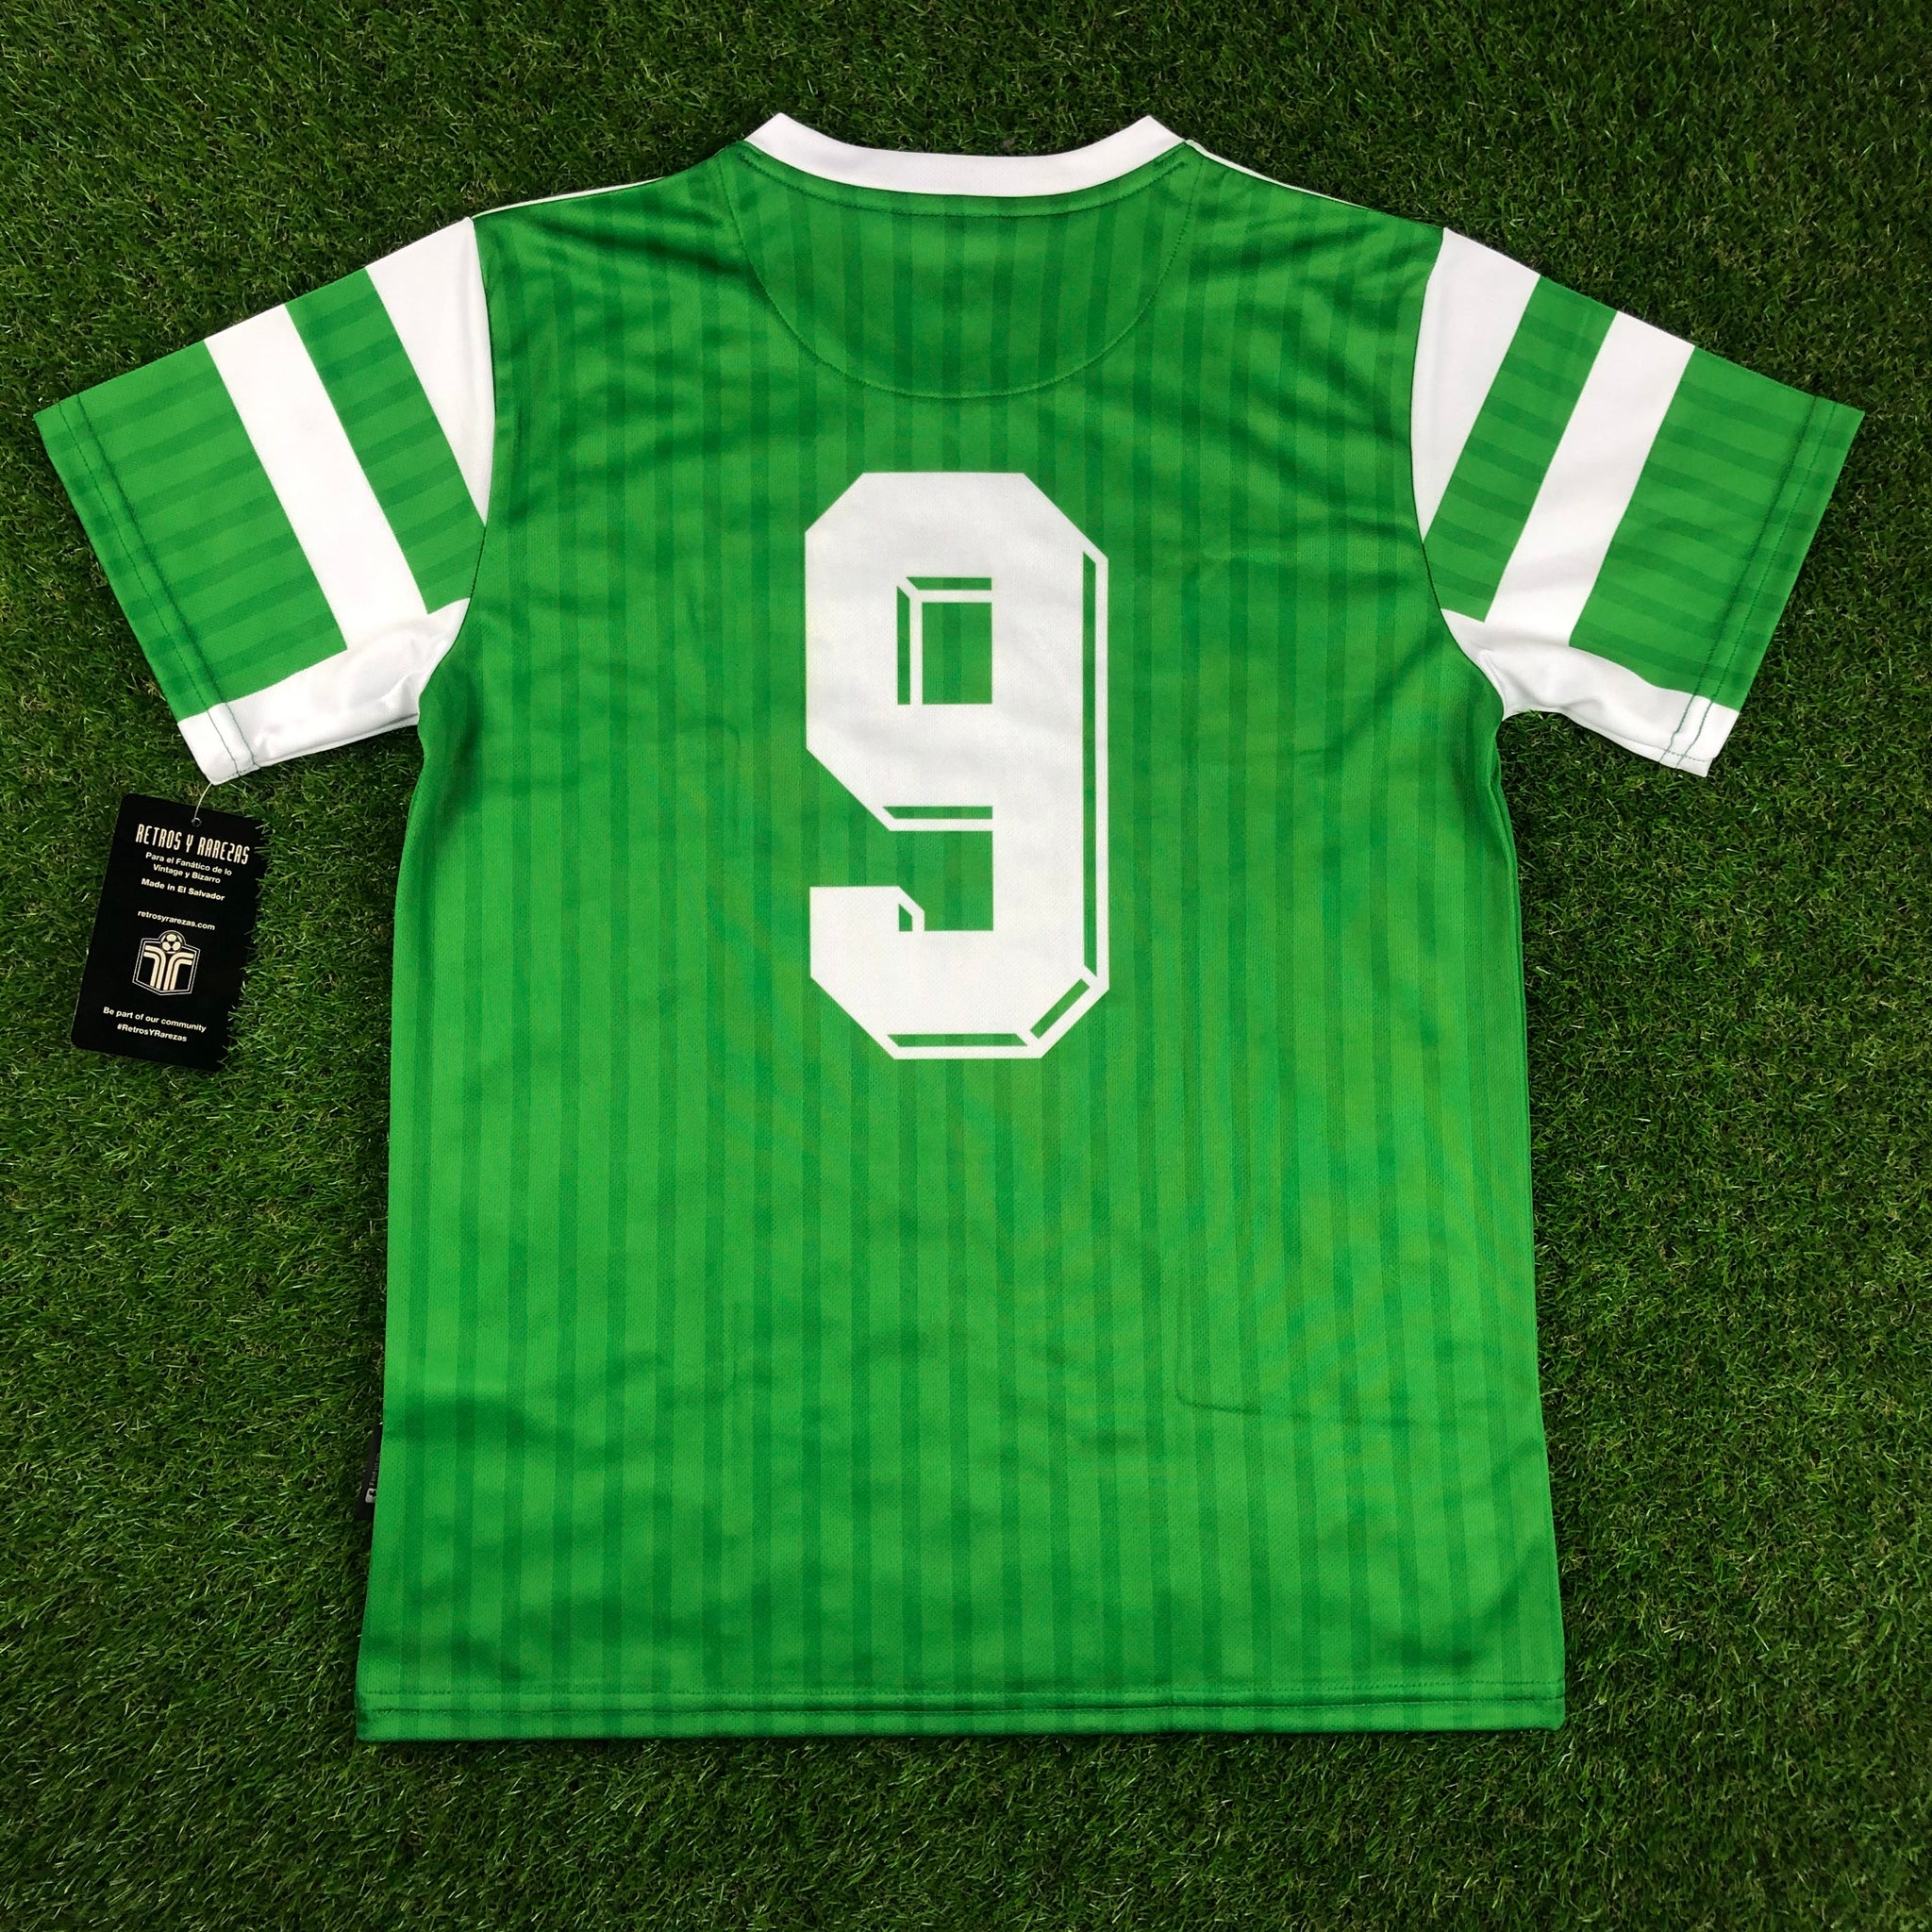 MEDIUM UNISEX MEXICO SOCCER JERSEY #9 OFFICIAL 1990 WORLD CUP FAN  PERFORMANCE JERSEY 